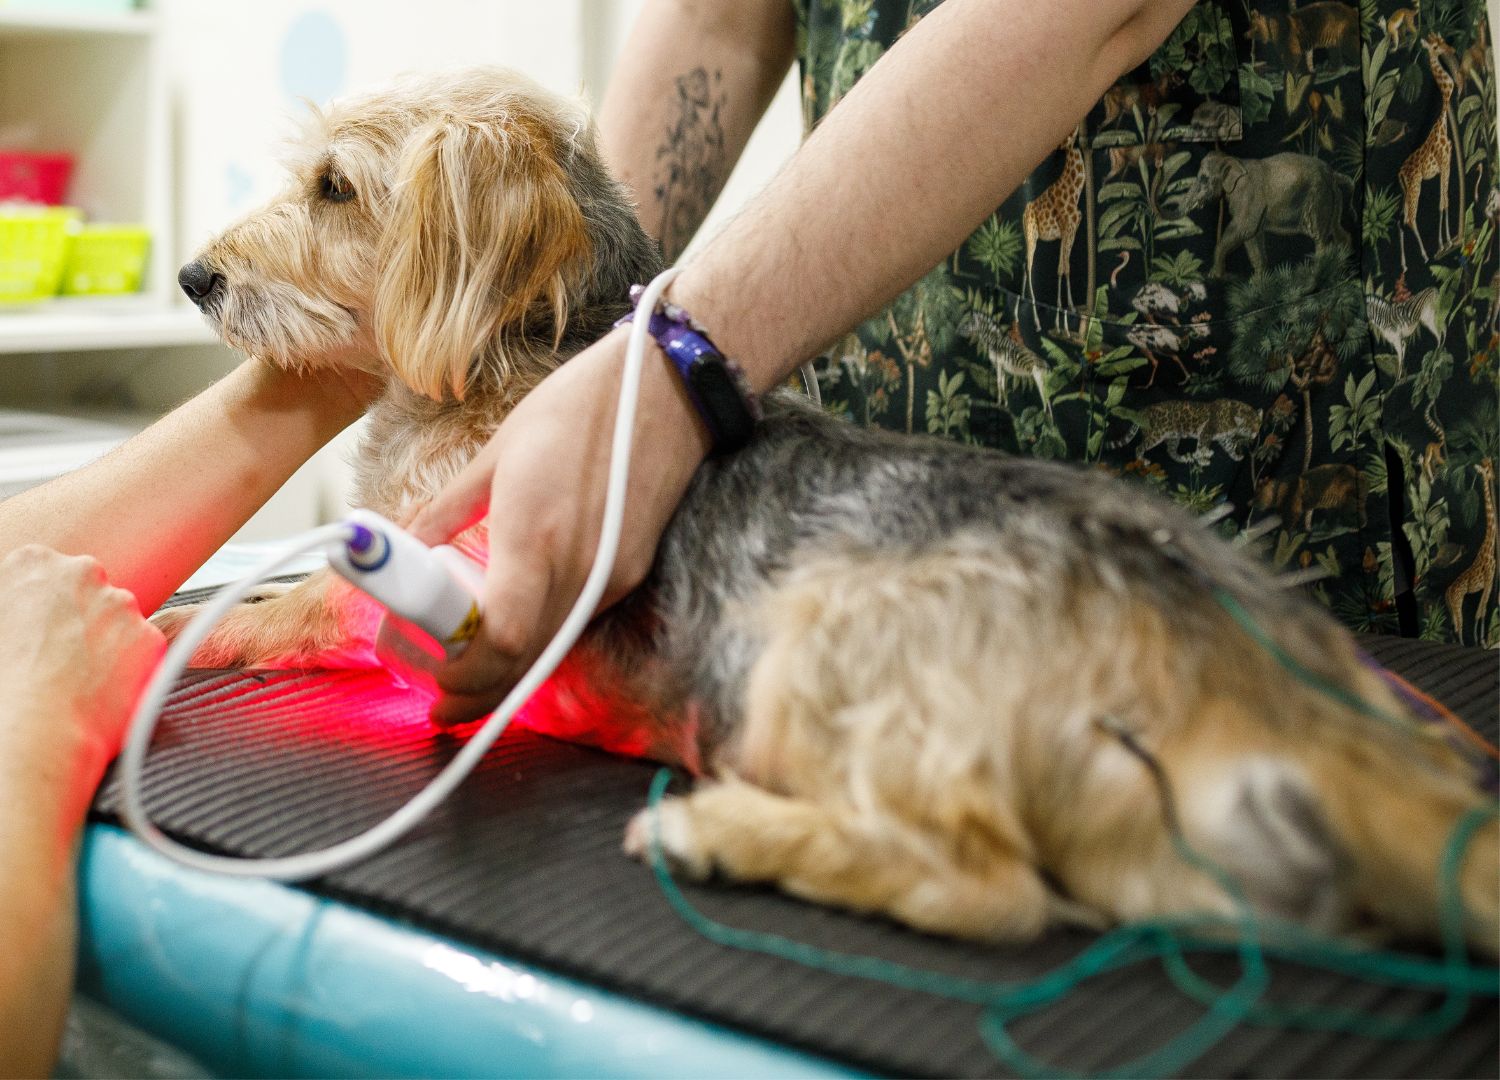 A person using a laser to check the body of a dog